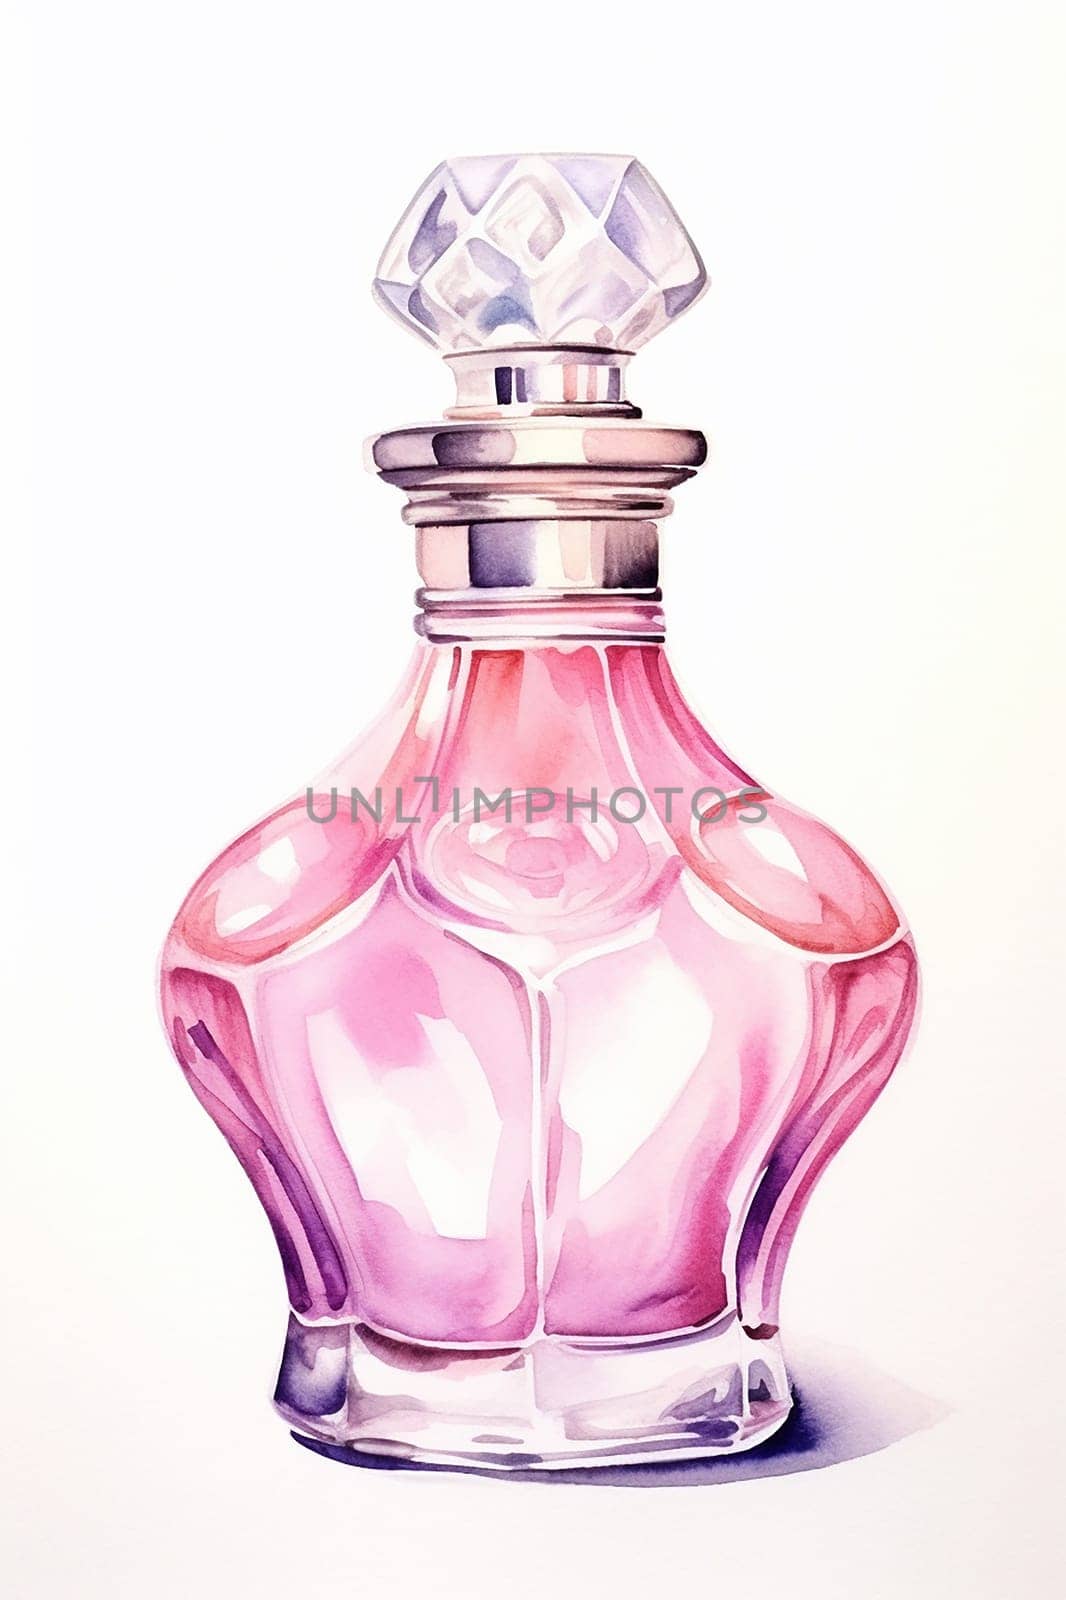 A photo of a perfume with soft aroma and fragrance, fashion beauty product